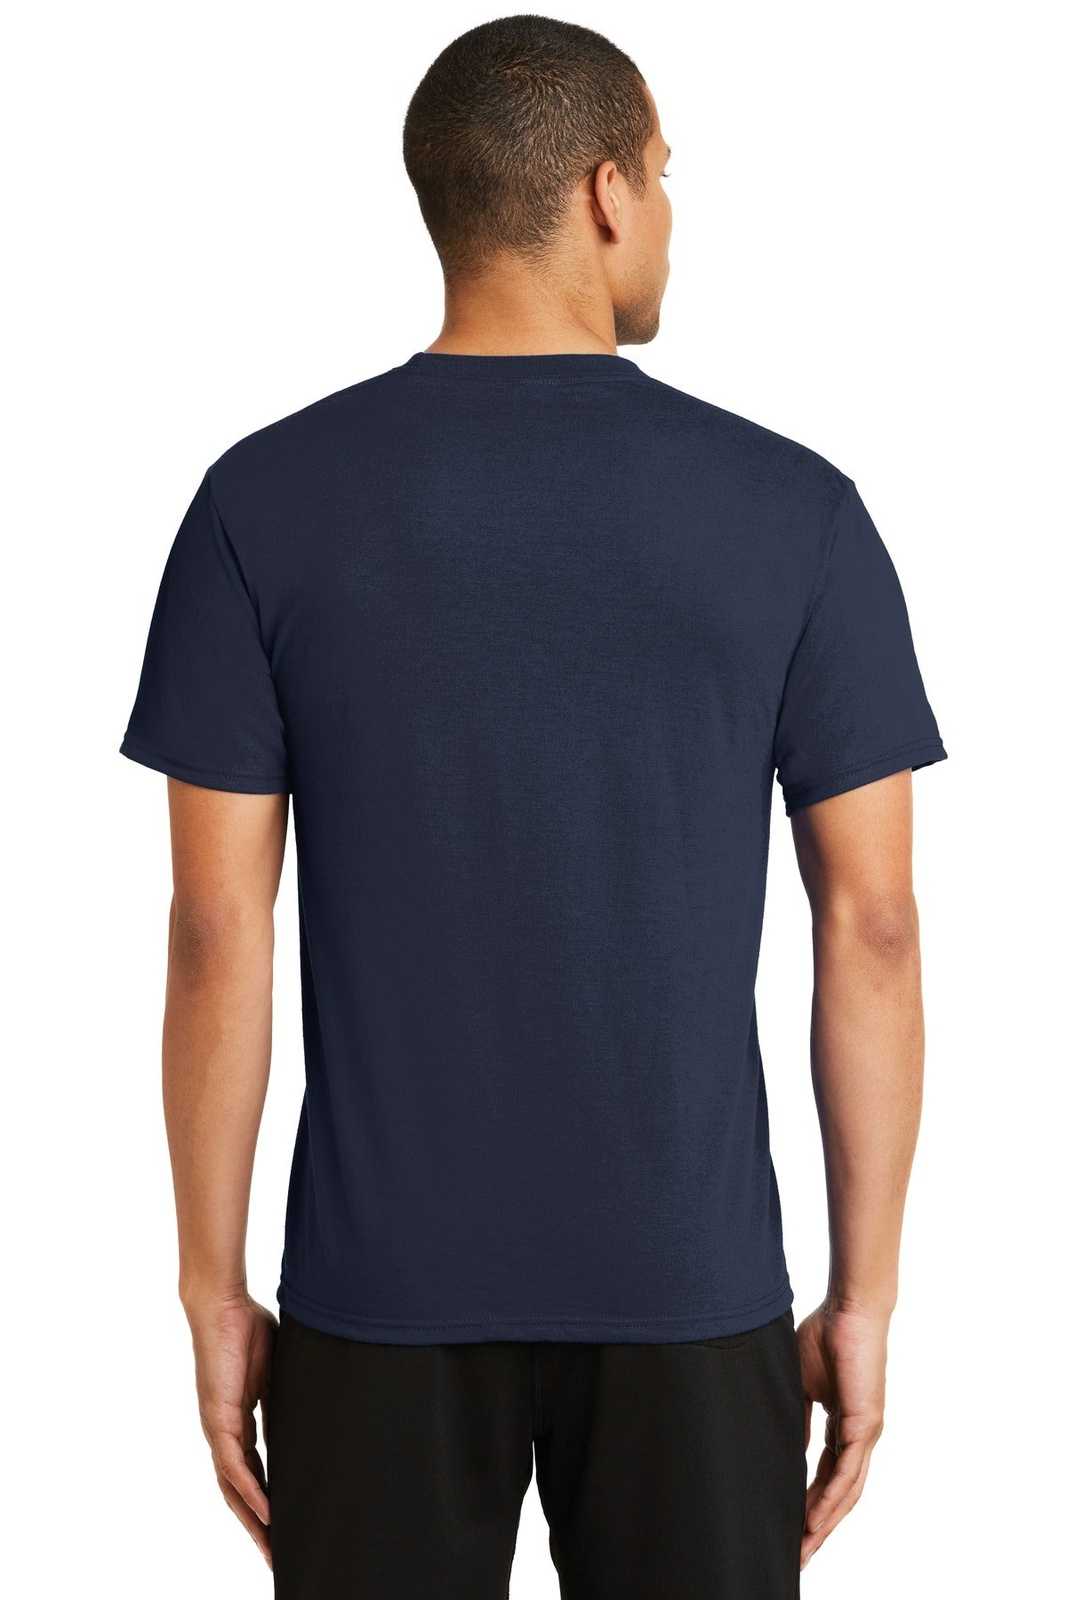 Port &amp; Company PC381 Performance Blend Tee - Deep Navy - HIT a Double - 2